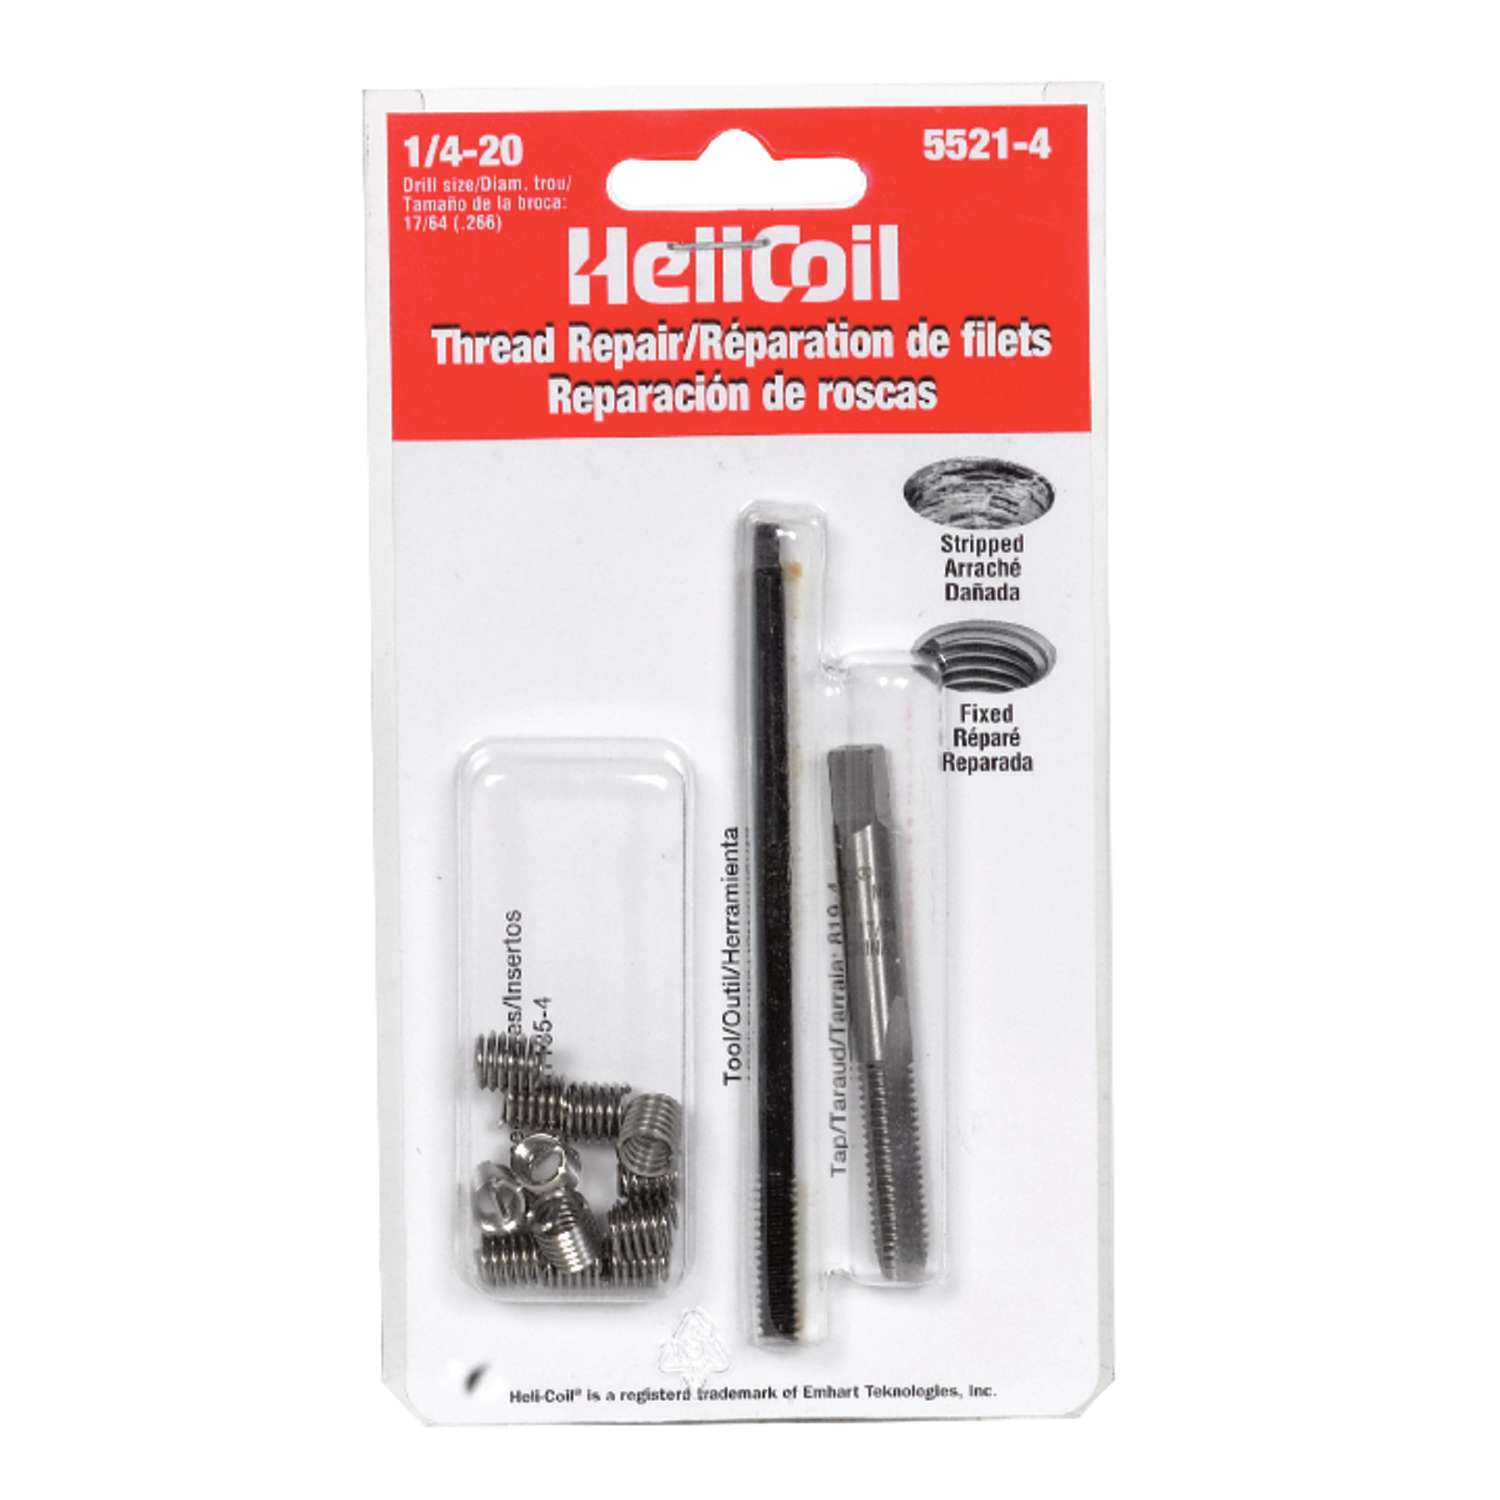 Details about   Perma Coil 3208-F14 Insert Thread Repair Kit 7/8-14 UNF Helicoil 5528-14 